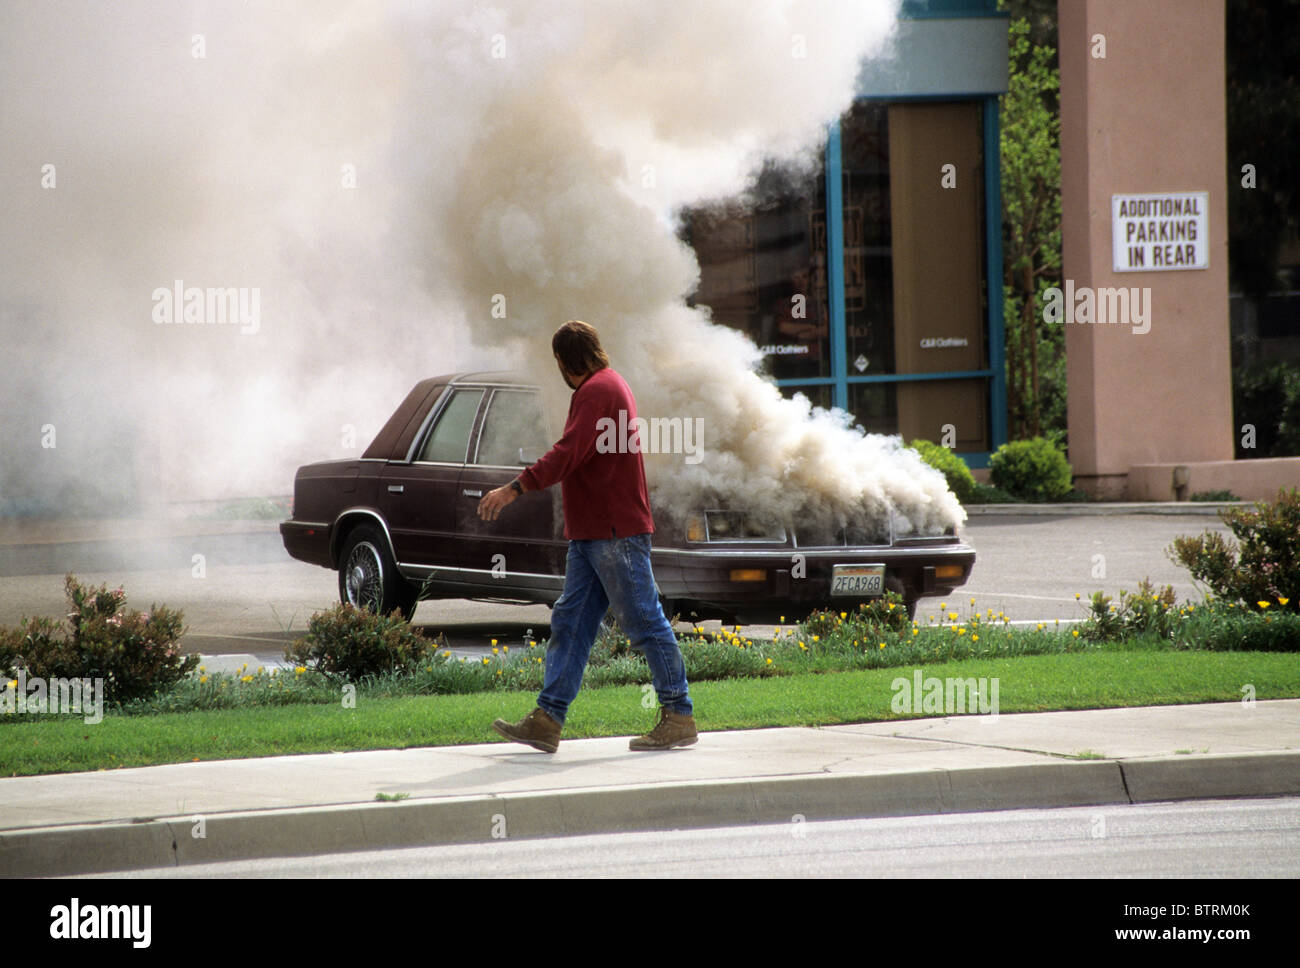 car fire smoke emergency 9-1-1 excitement insurance damage firefighter response Stock Photo